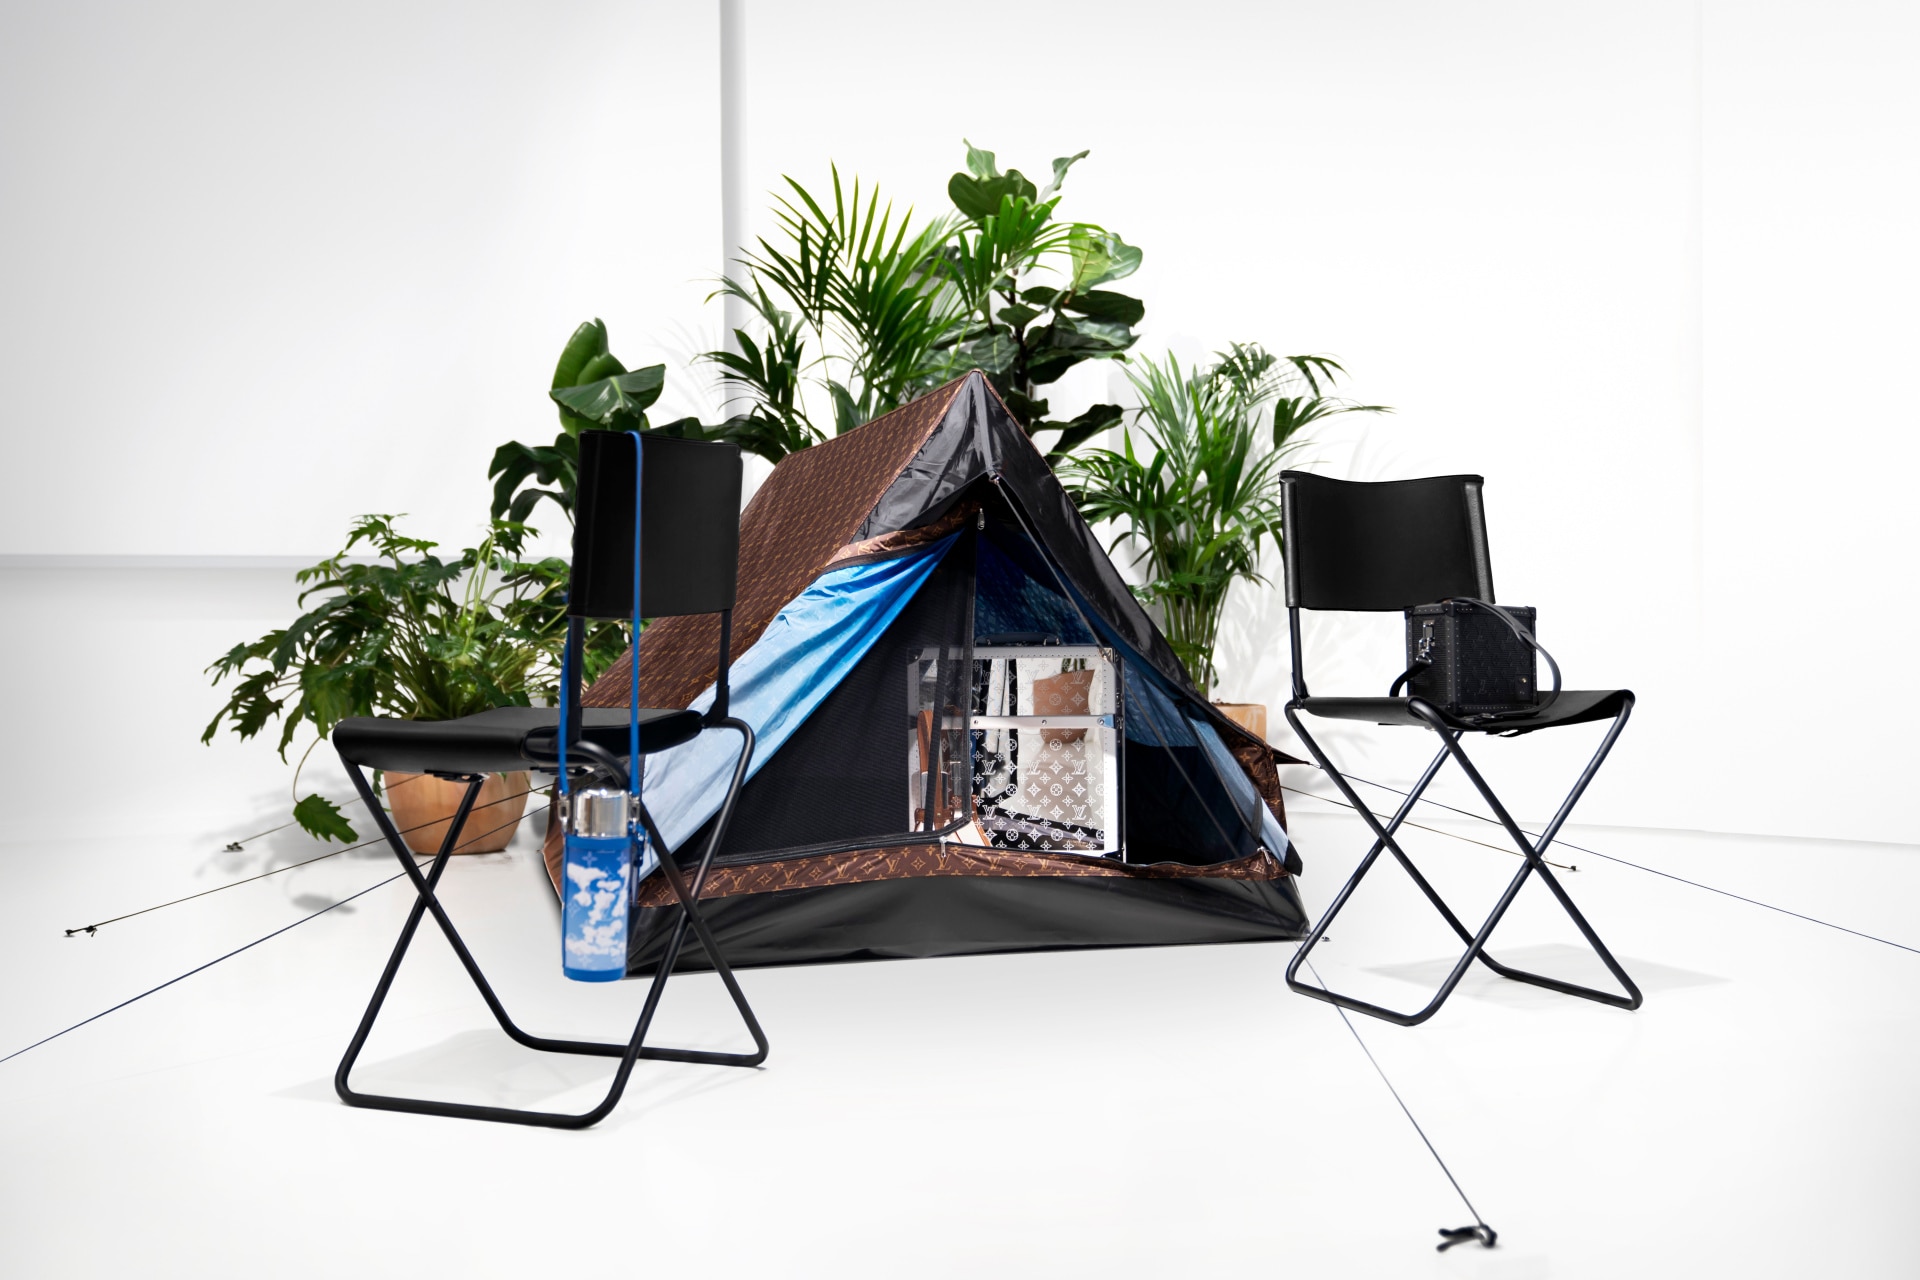 You can now buy a $109,000 Louis Vuitton tent for the ultimate